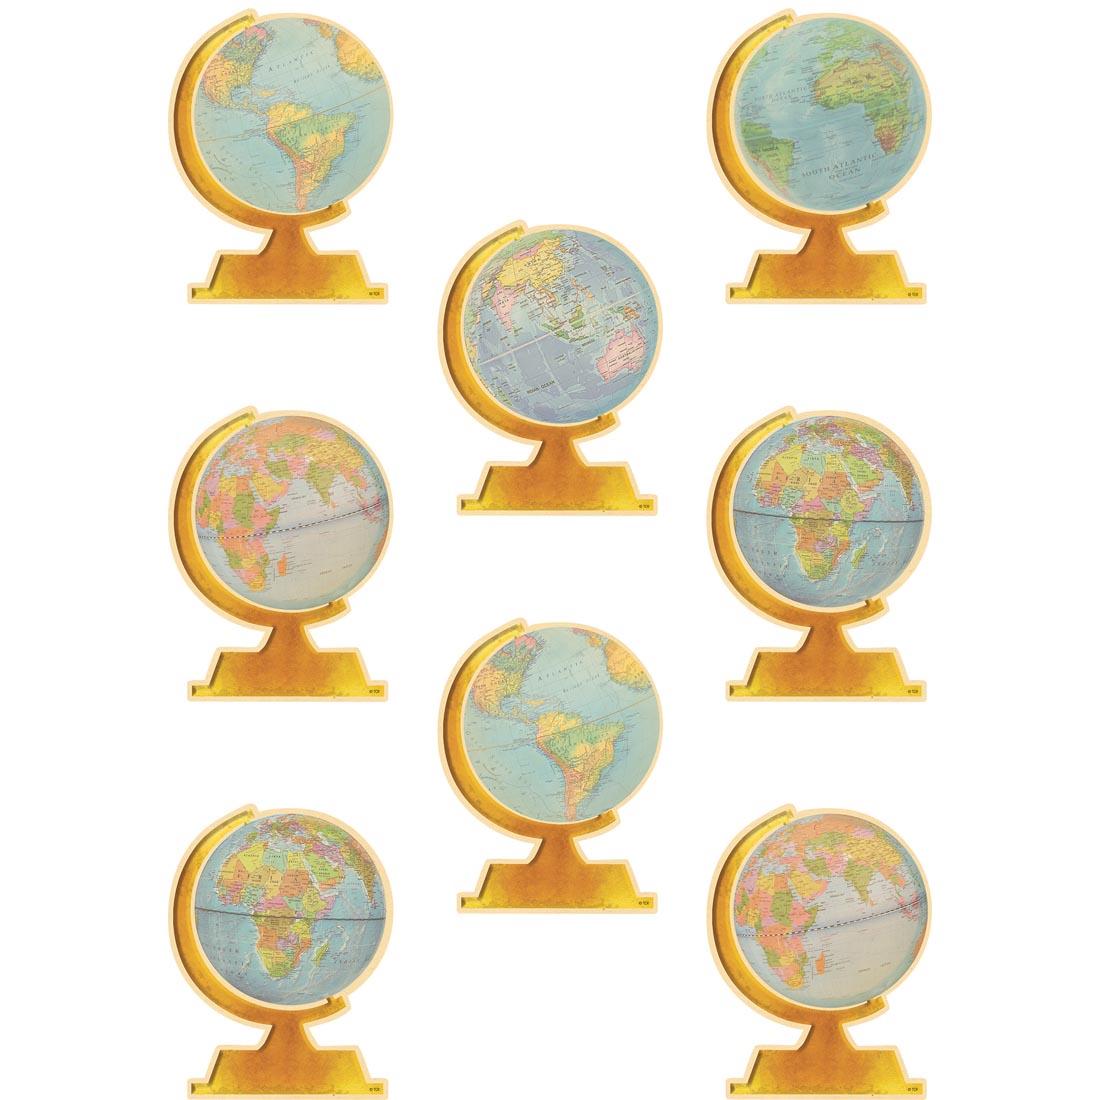 Globes Accents from the Travel the Map collection by Teacher Created Resources